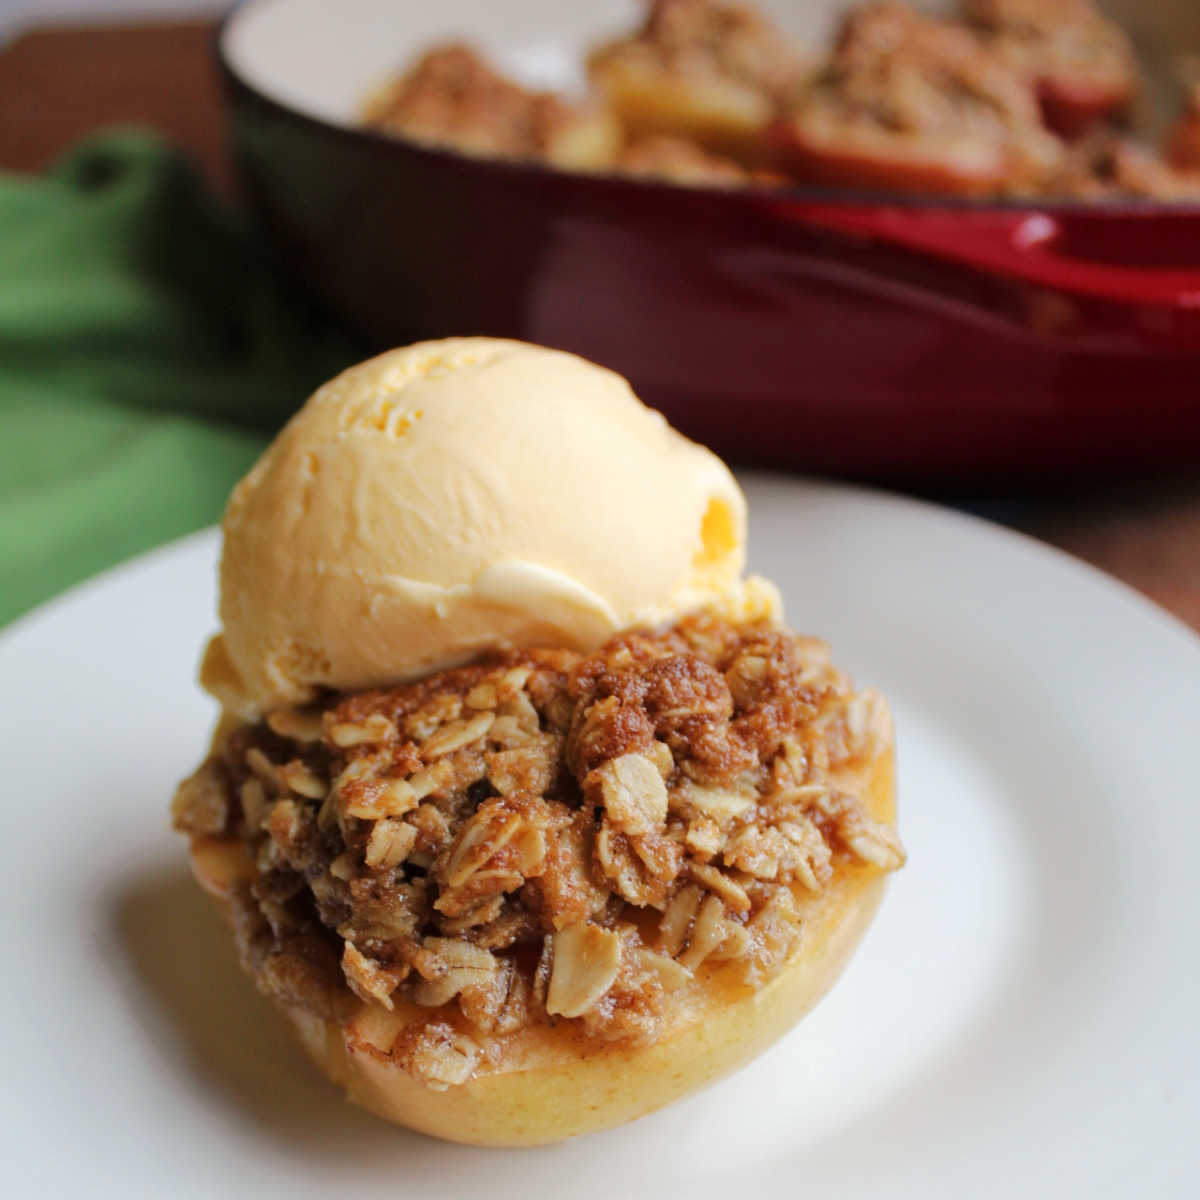 Baked apple half stuffed with brown sugar and oat crisp topping finished with a scoop of vanilla ice cream, ready to eat.